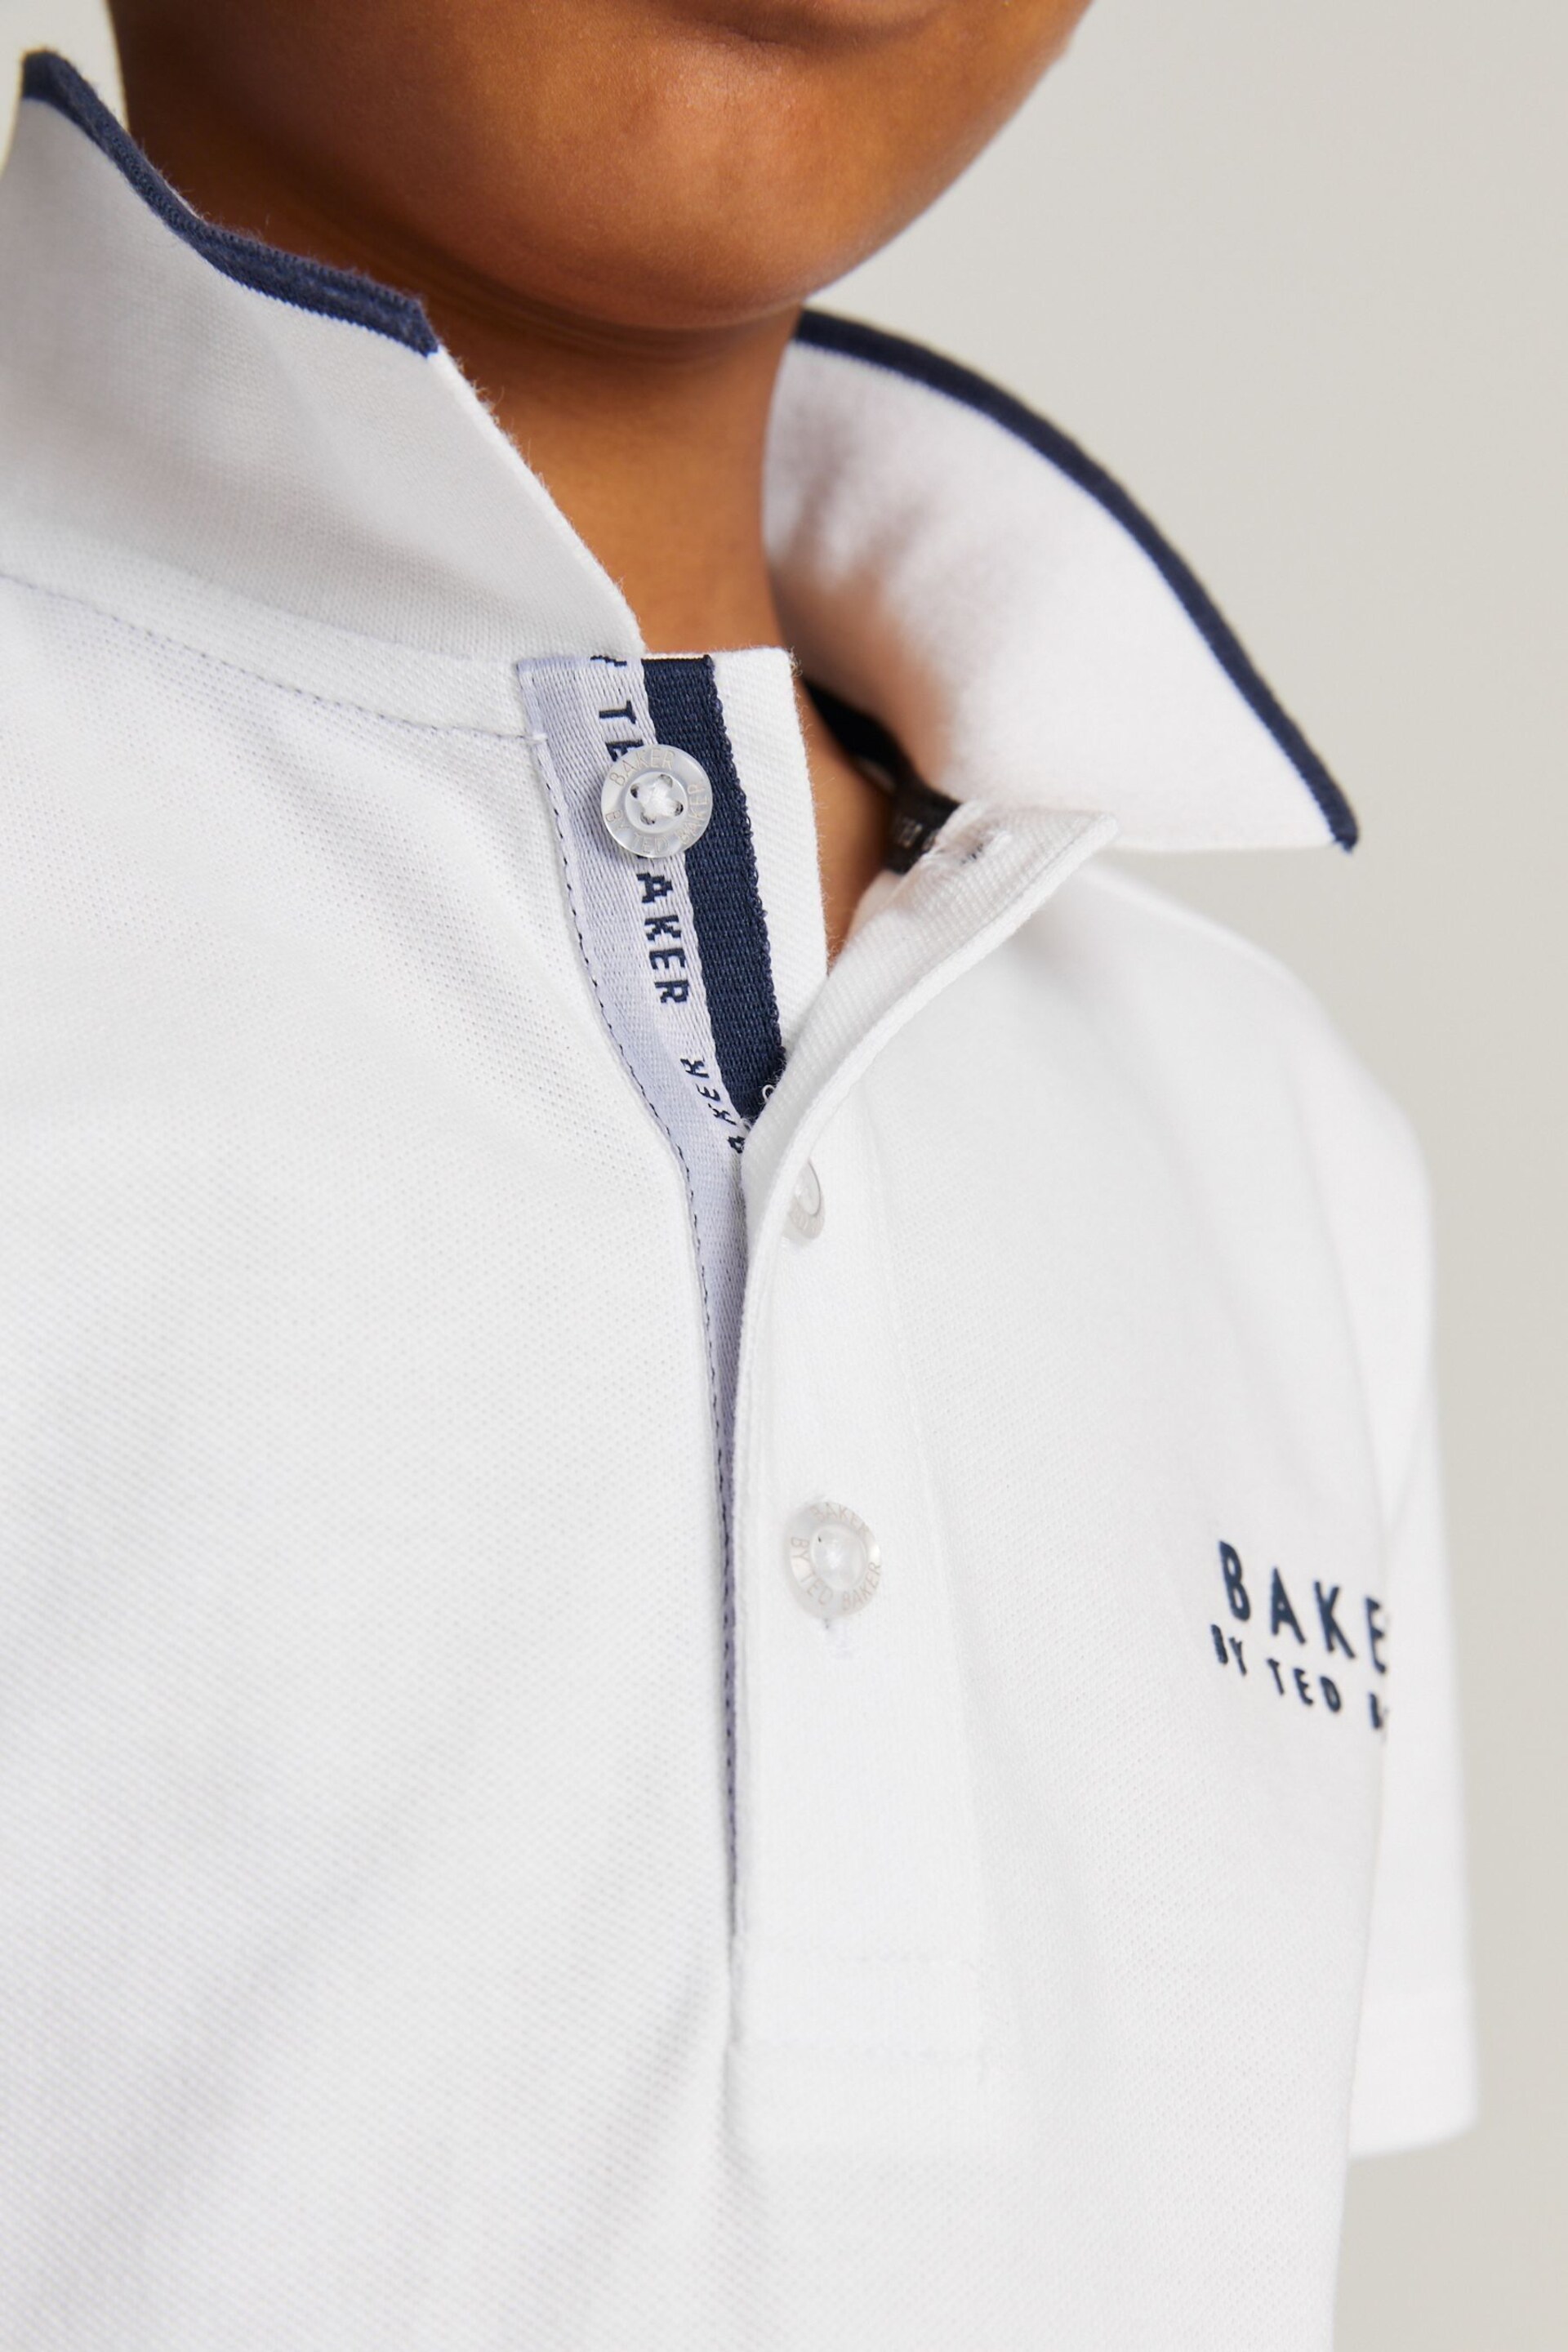 Baker by Ted Baker Polo Shirt - Image 5 of 8